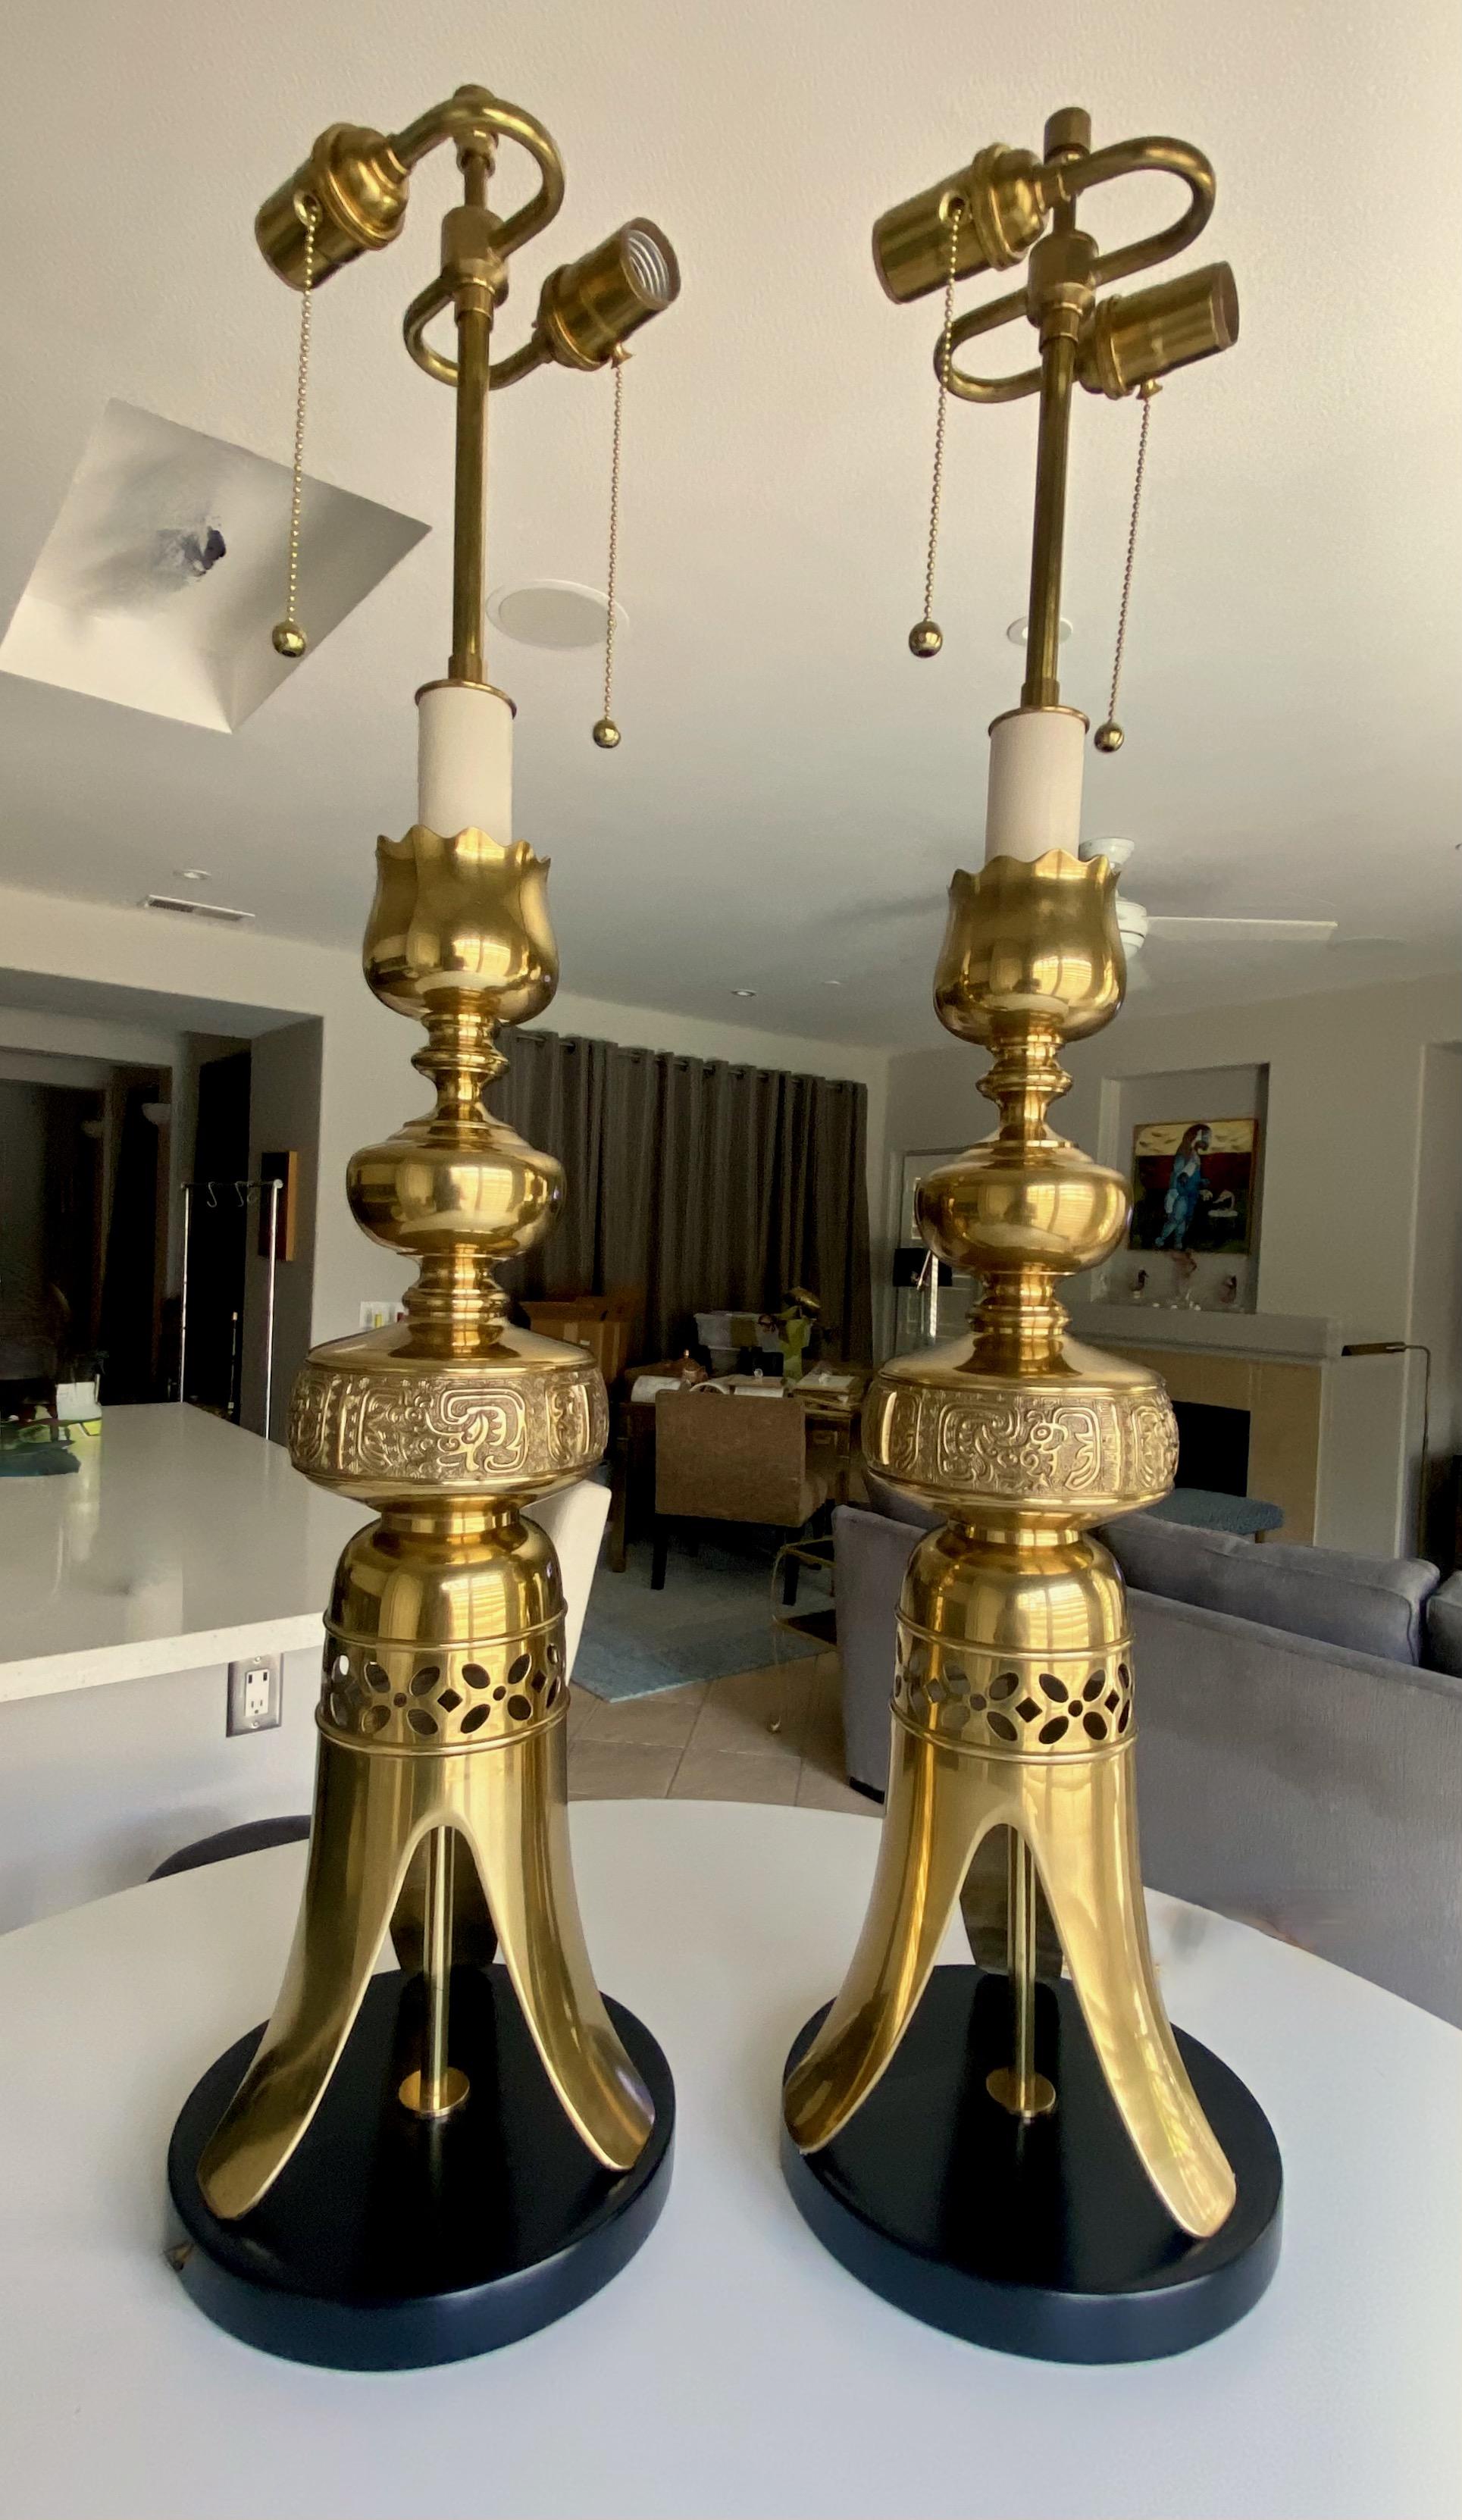 Pair solid brass James Mont Asian style candle sticks converted to table lamps resting on black lacquered wood bases. Newly wired with new French style rayon covered cords and new brass double cluster fittings. The condition of the brass finish and